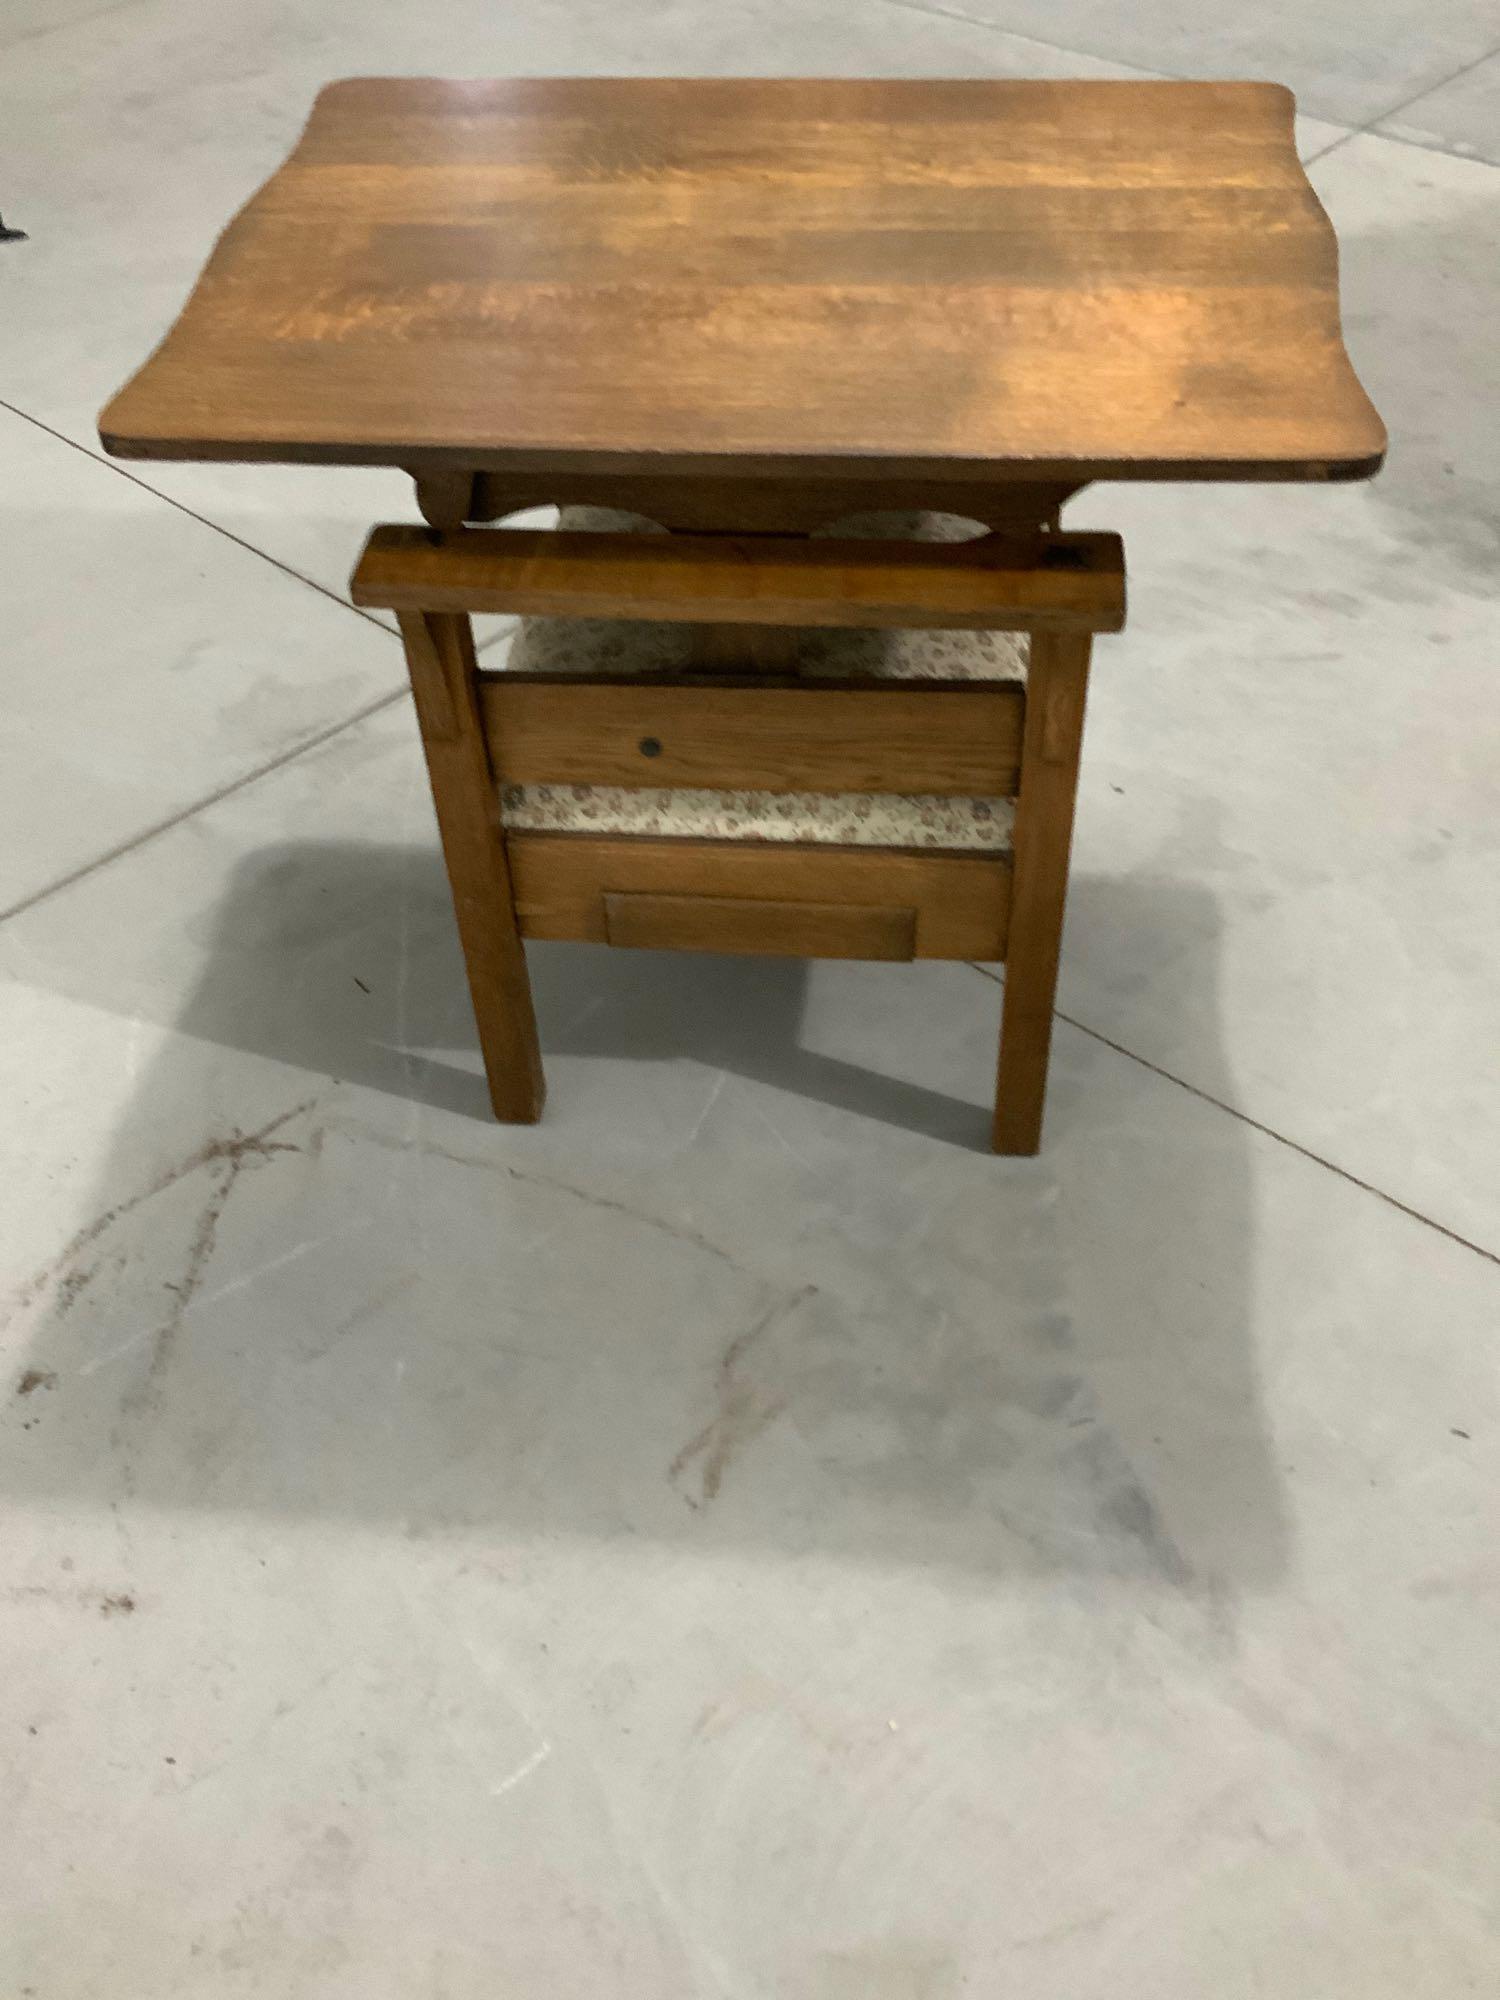 MISSION OAK TABLE CHAIR WITH DRAWER